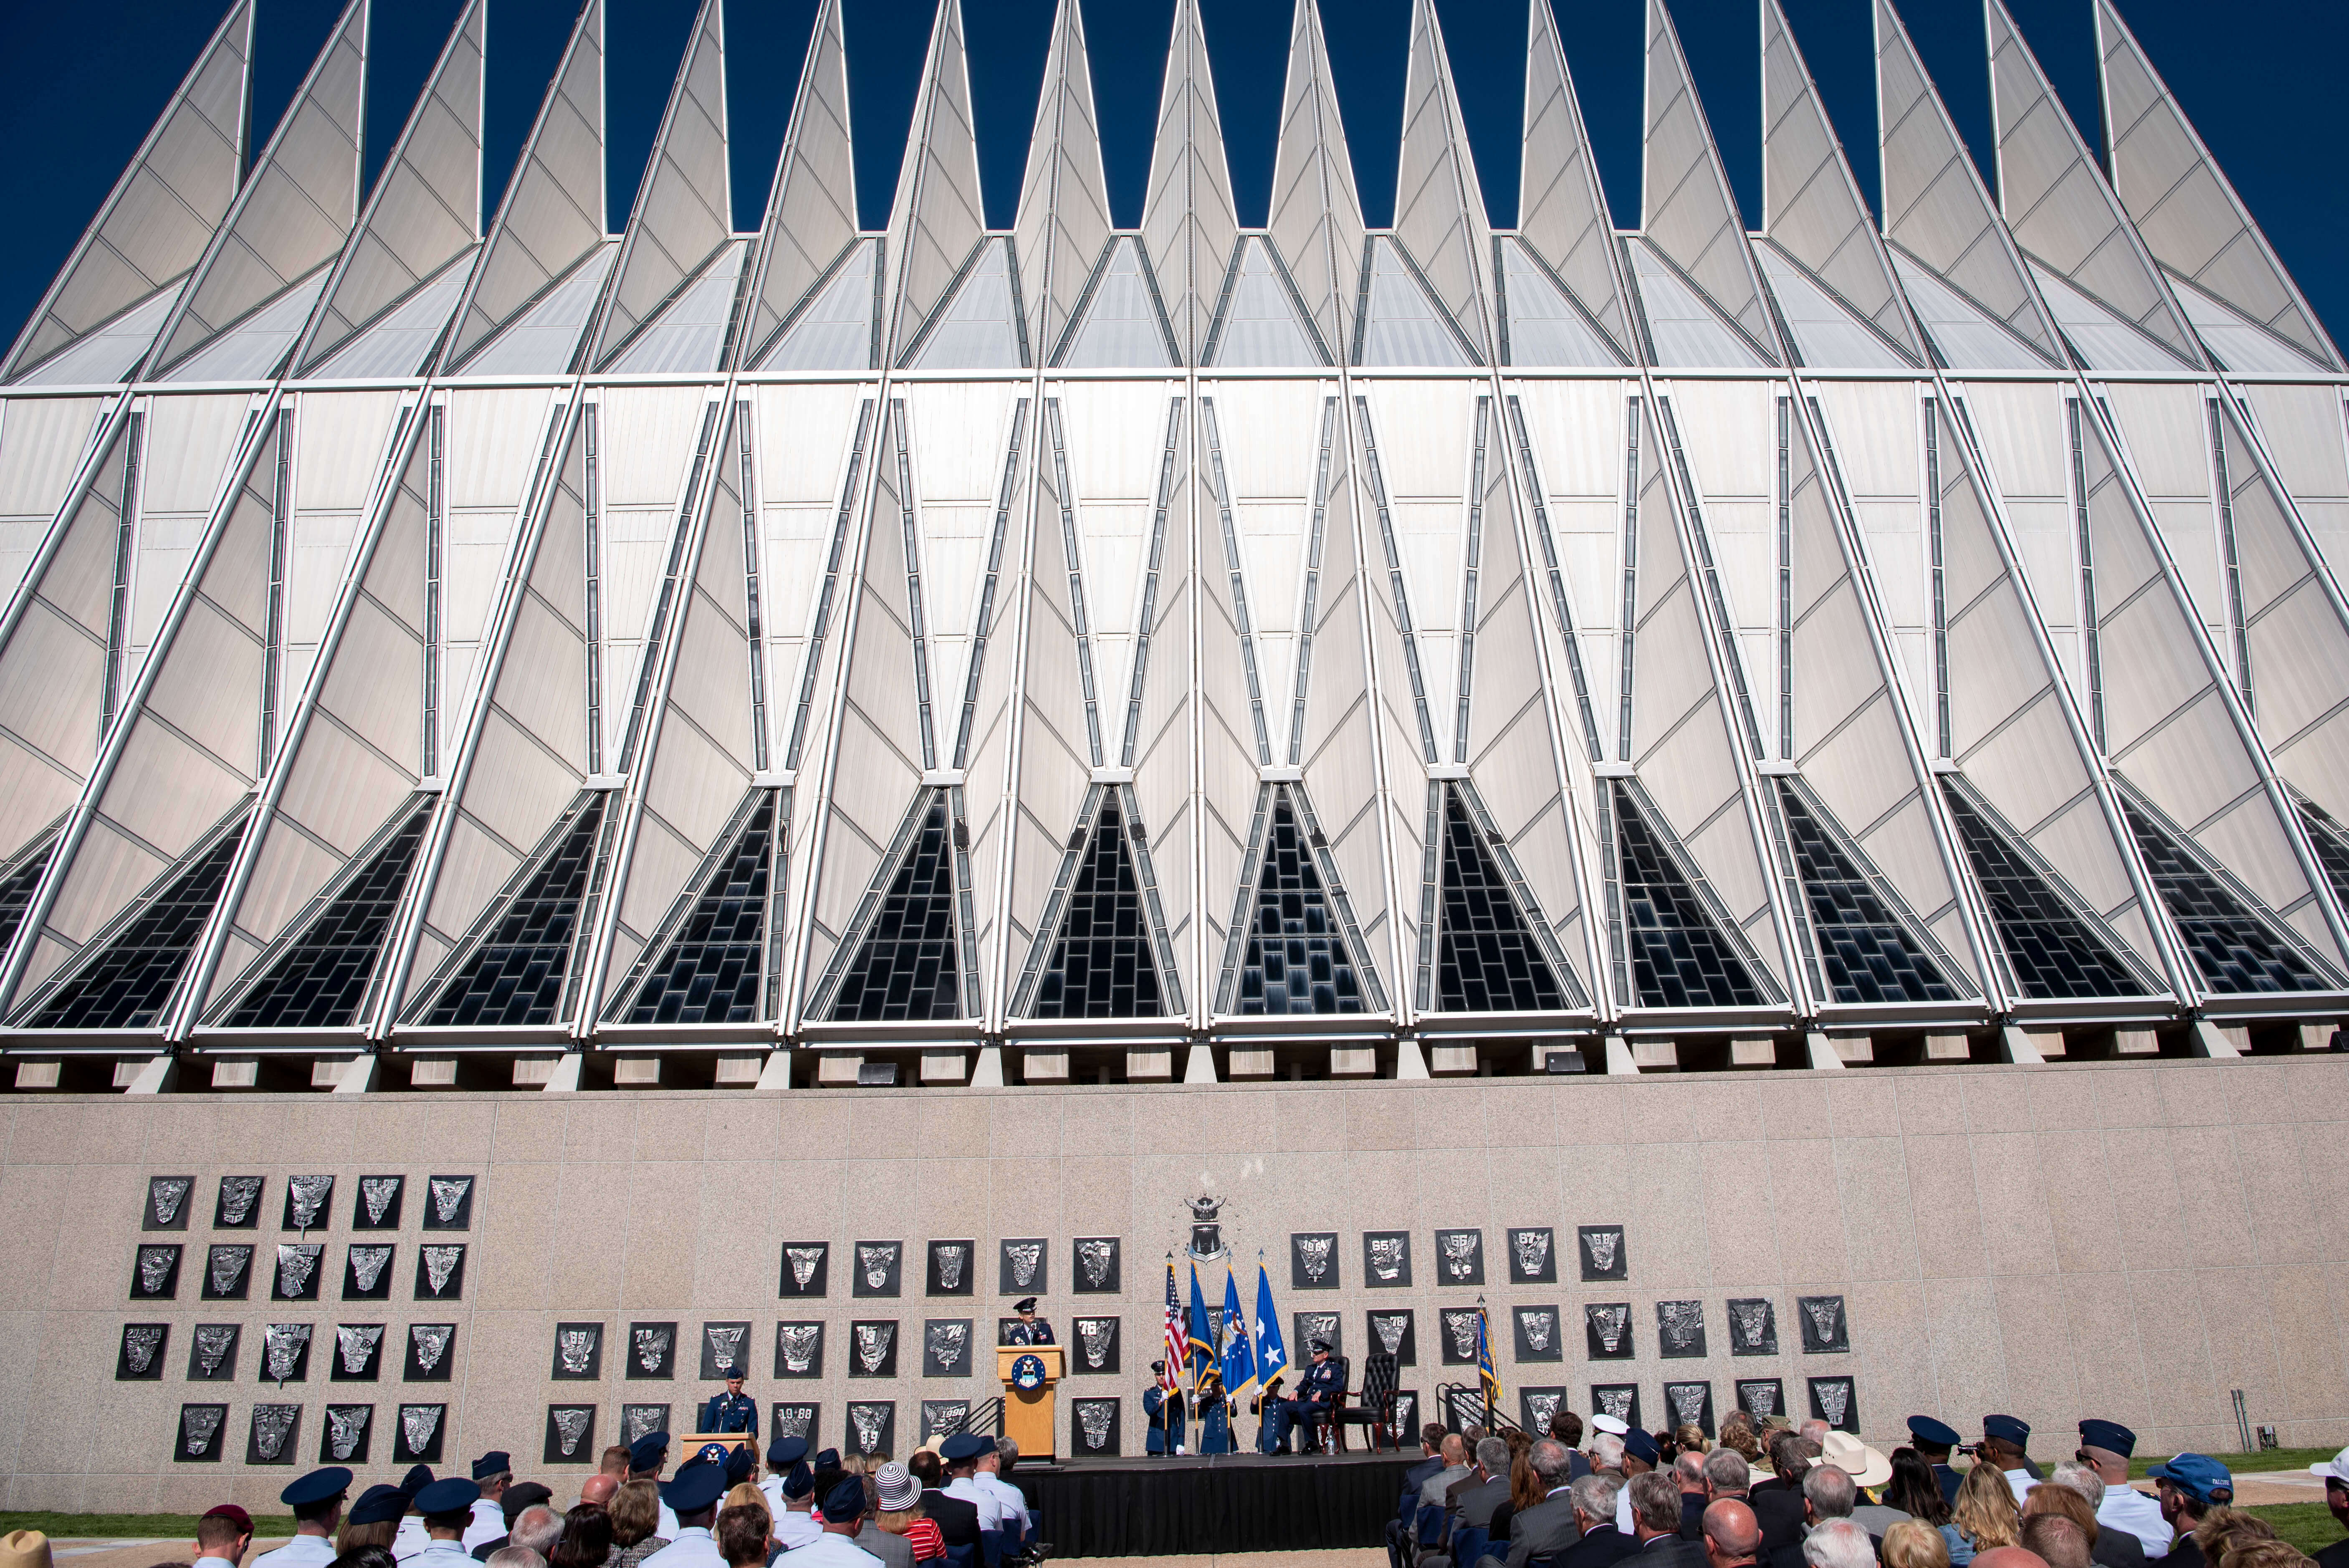 A crowd gathers on the Terrazzo at the U.S. Air Force Academy to watch Brig. Gen. Michele Edmondson become the Academy's 29th commandant of cadets